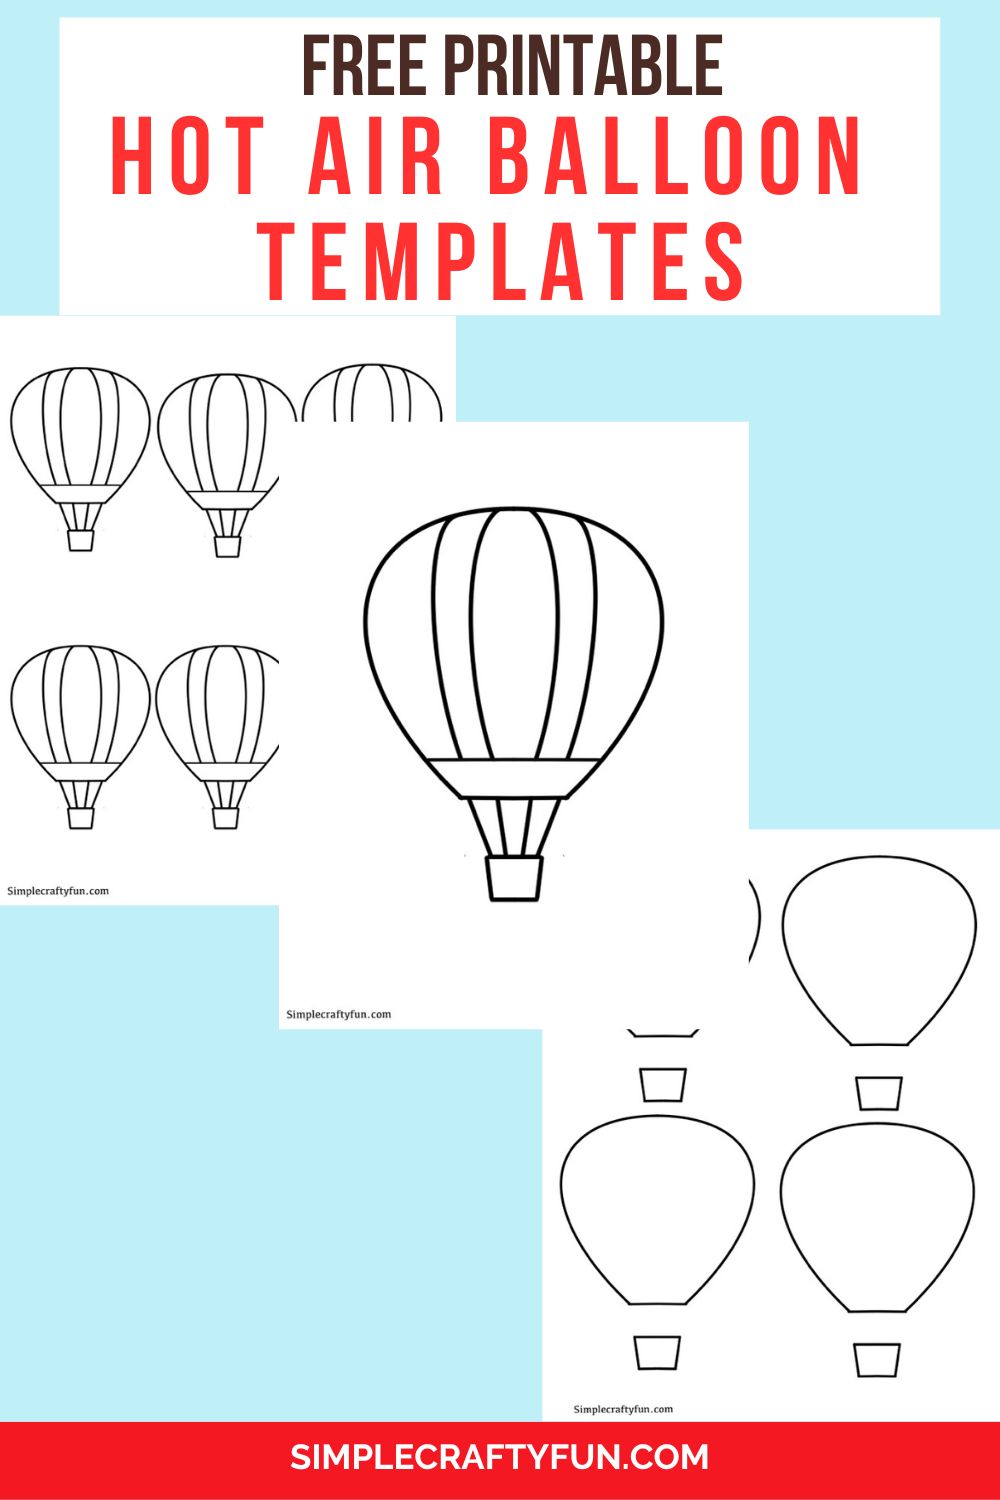 Free printable hot air balloon templates and coloring pages